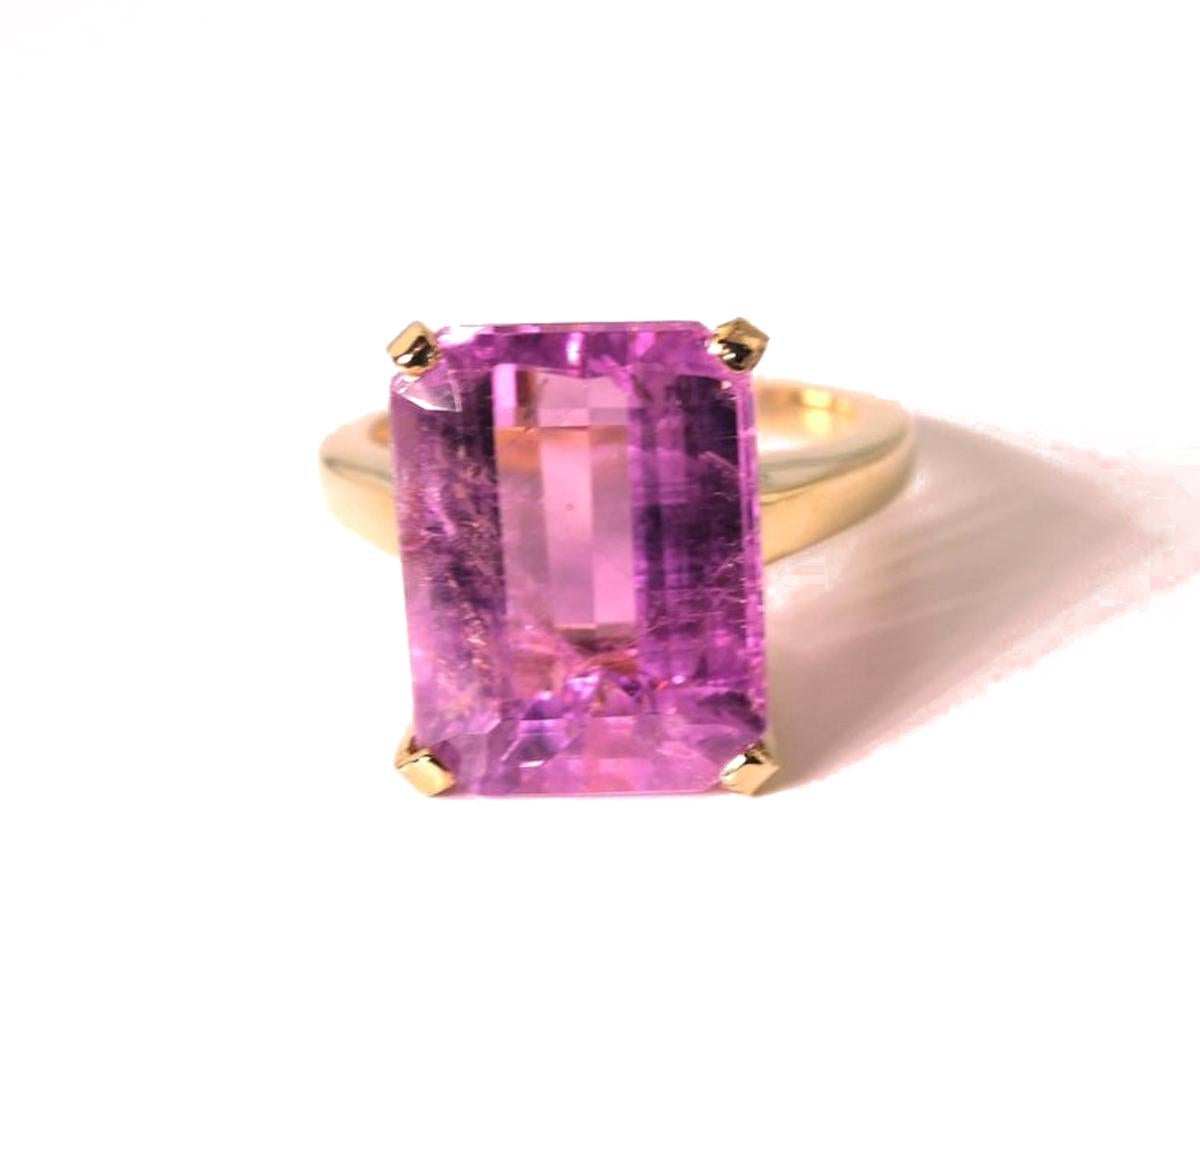 This gorgeous pinky purple 13.5 carat  Kunzite  is clear and glistening, set in a handmade unique 14Kt yellow Gold ring.  The ring is a  size 7 (sizable).  The gemstone measures 15 mm x 12 mm and is truly magnificent.   More from this seller by